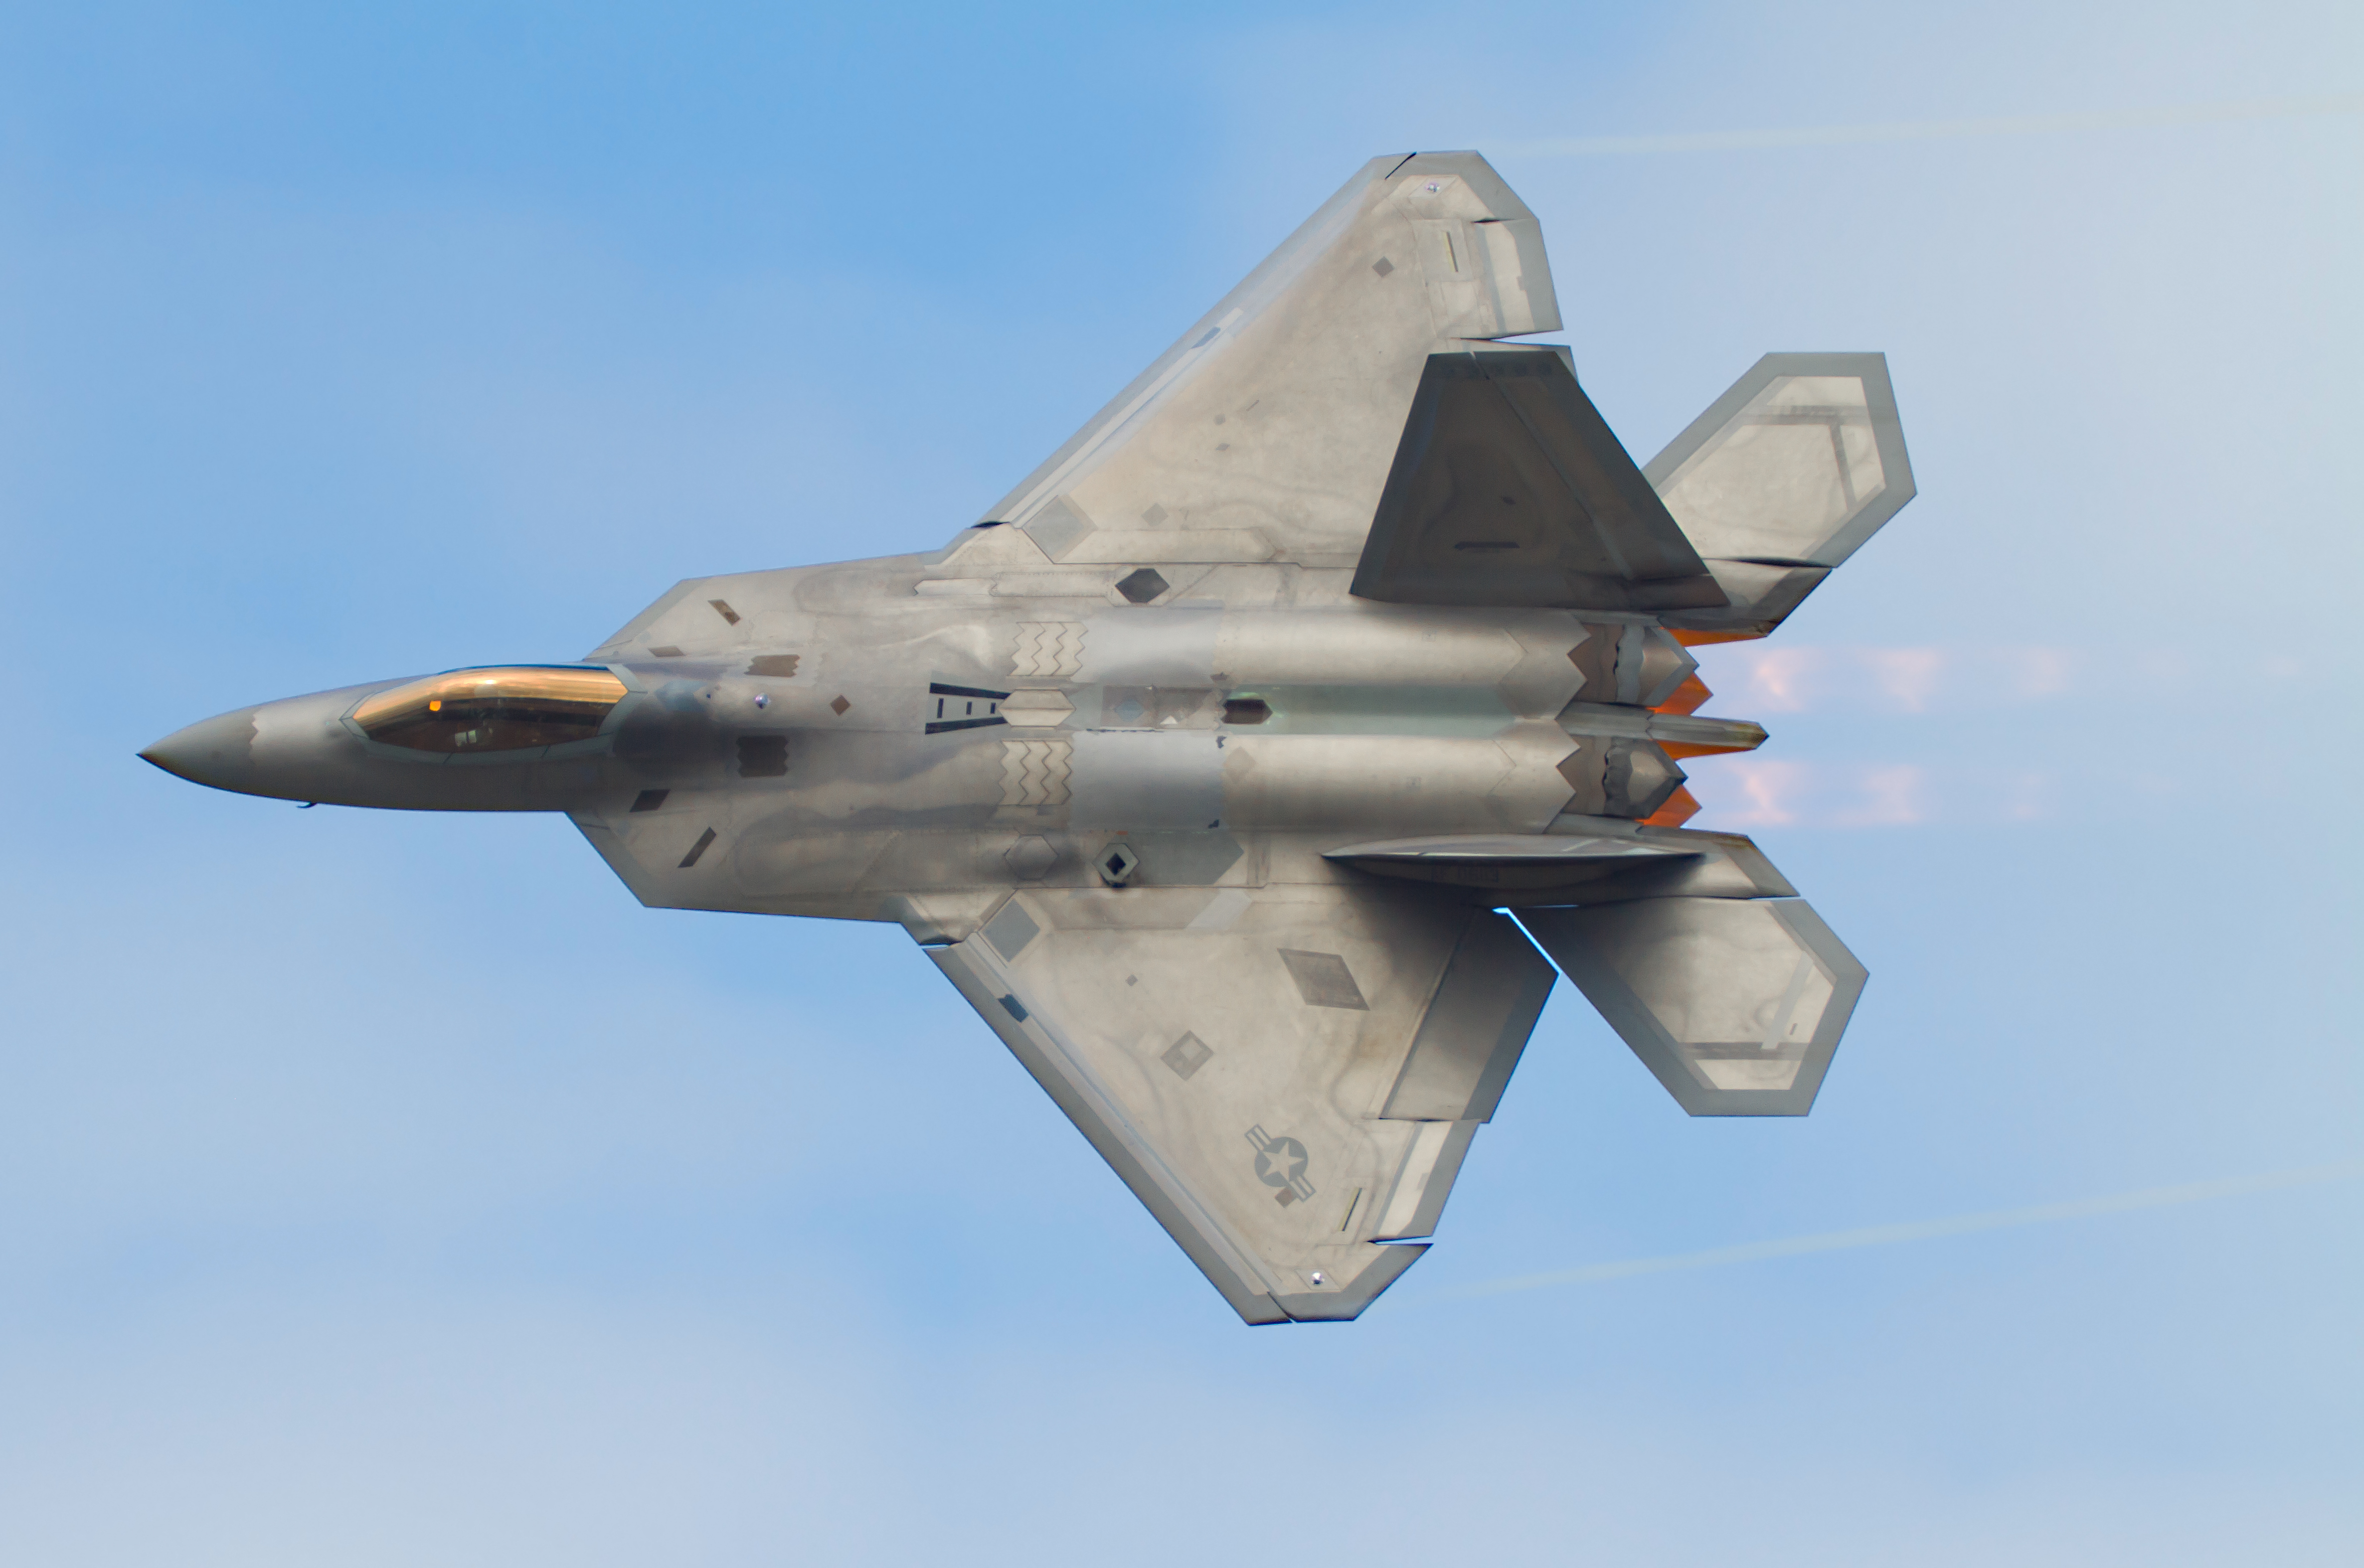 Lockheed Martin F-22A Raptor carries out a 'Dedication Pass' as part of it's display at Joint Base Elmendorf-Richardson, Anchorage, Alaska. (Keith Draycott&mdash;FlickrVision)